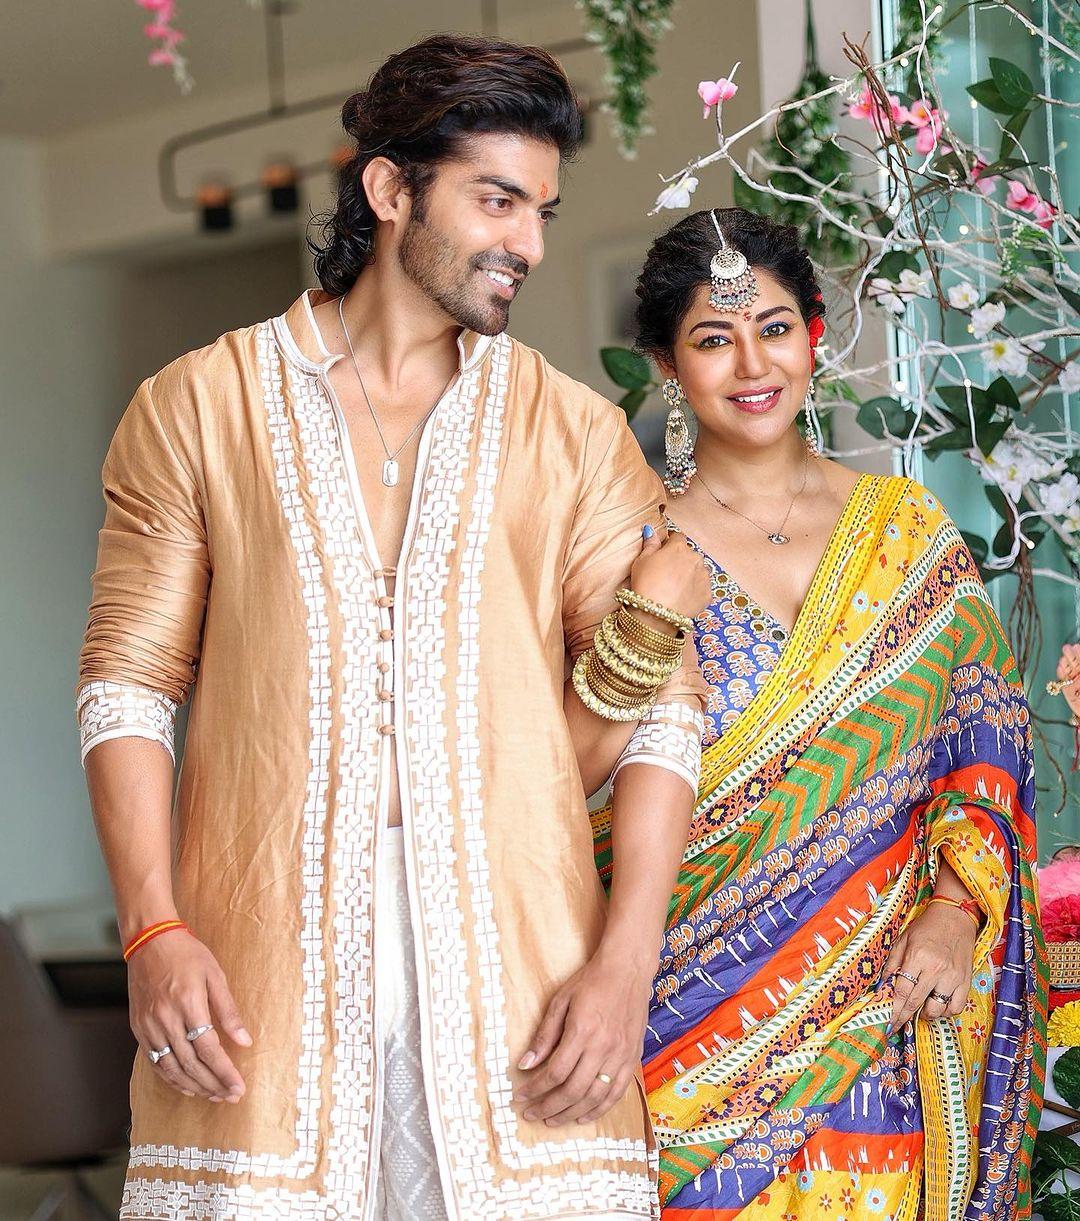 Debina Bonnerjee donned a vibrant, multi-colored saree that added a burst of colors to the festivities.